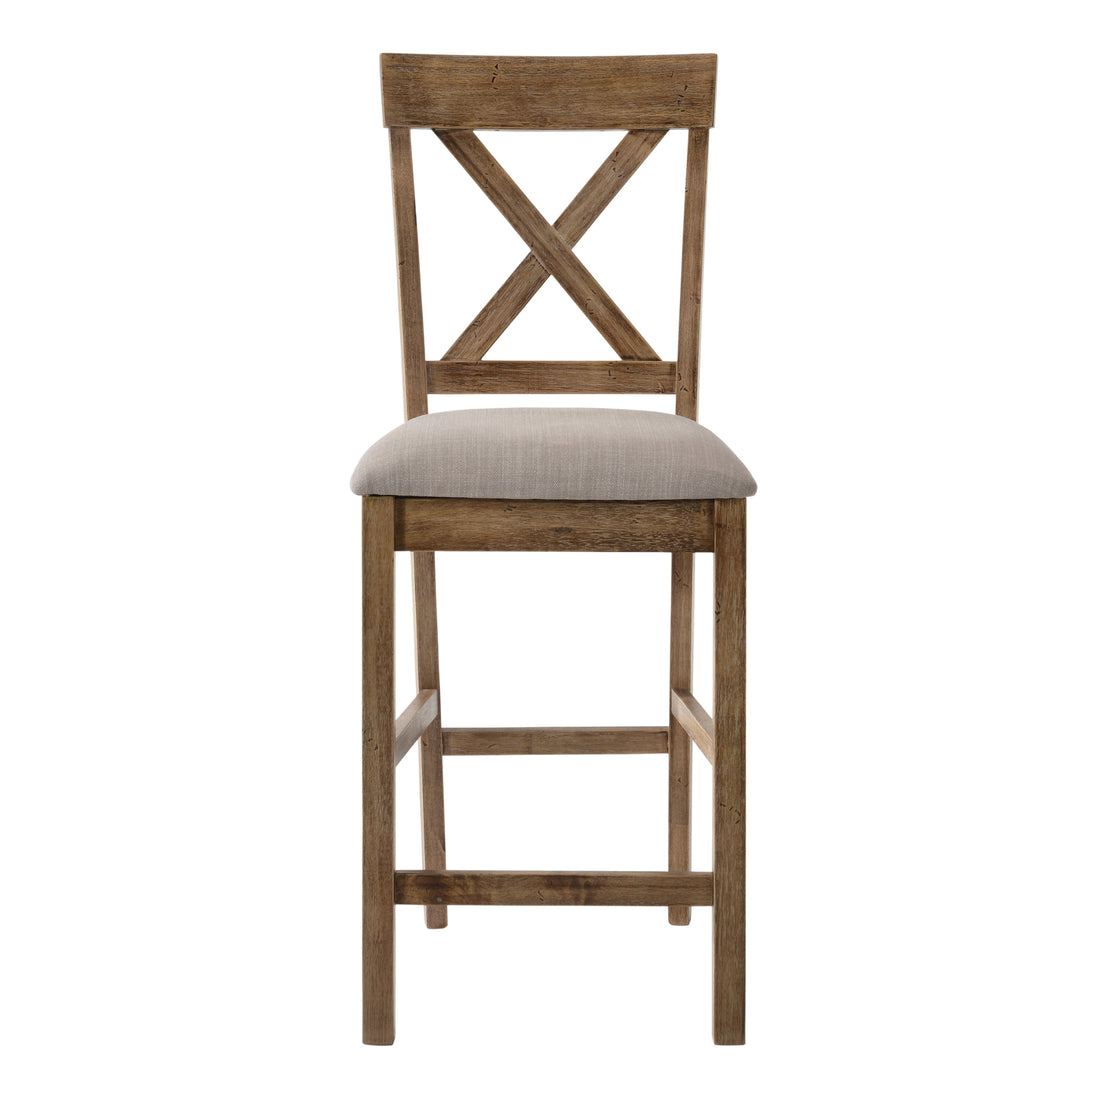 Tan And Weathered Oak Counter Height Stools With